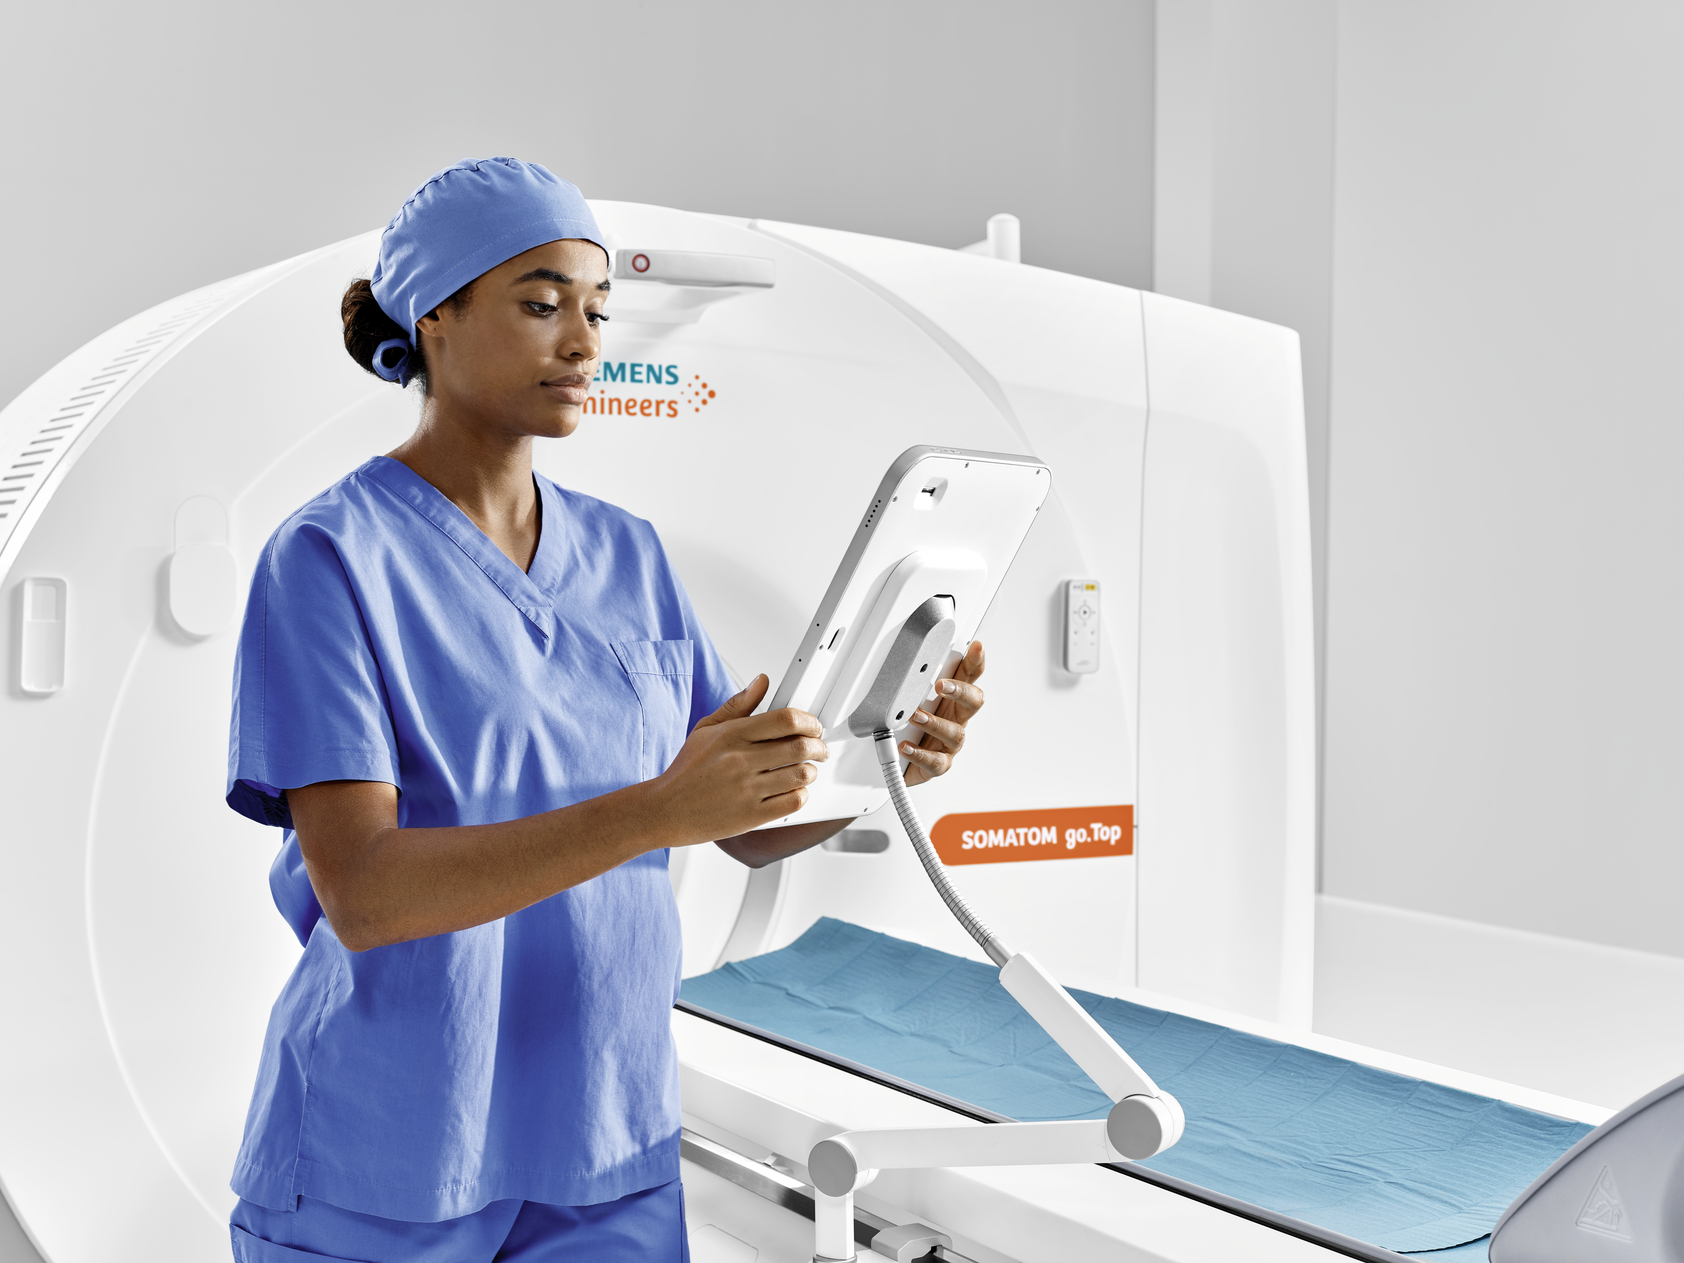 SOMATOM go.Top CT Scanner with tech operating touch pad